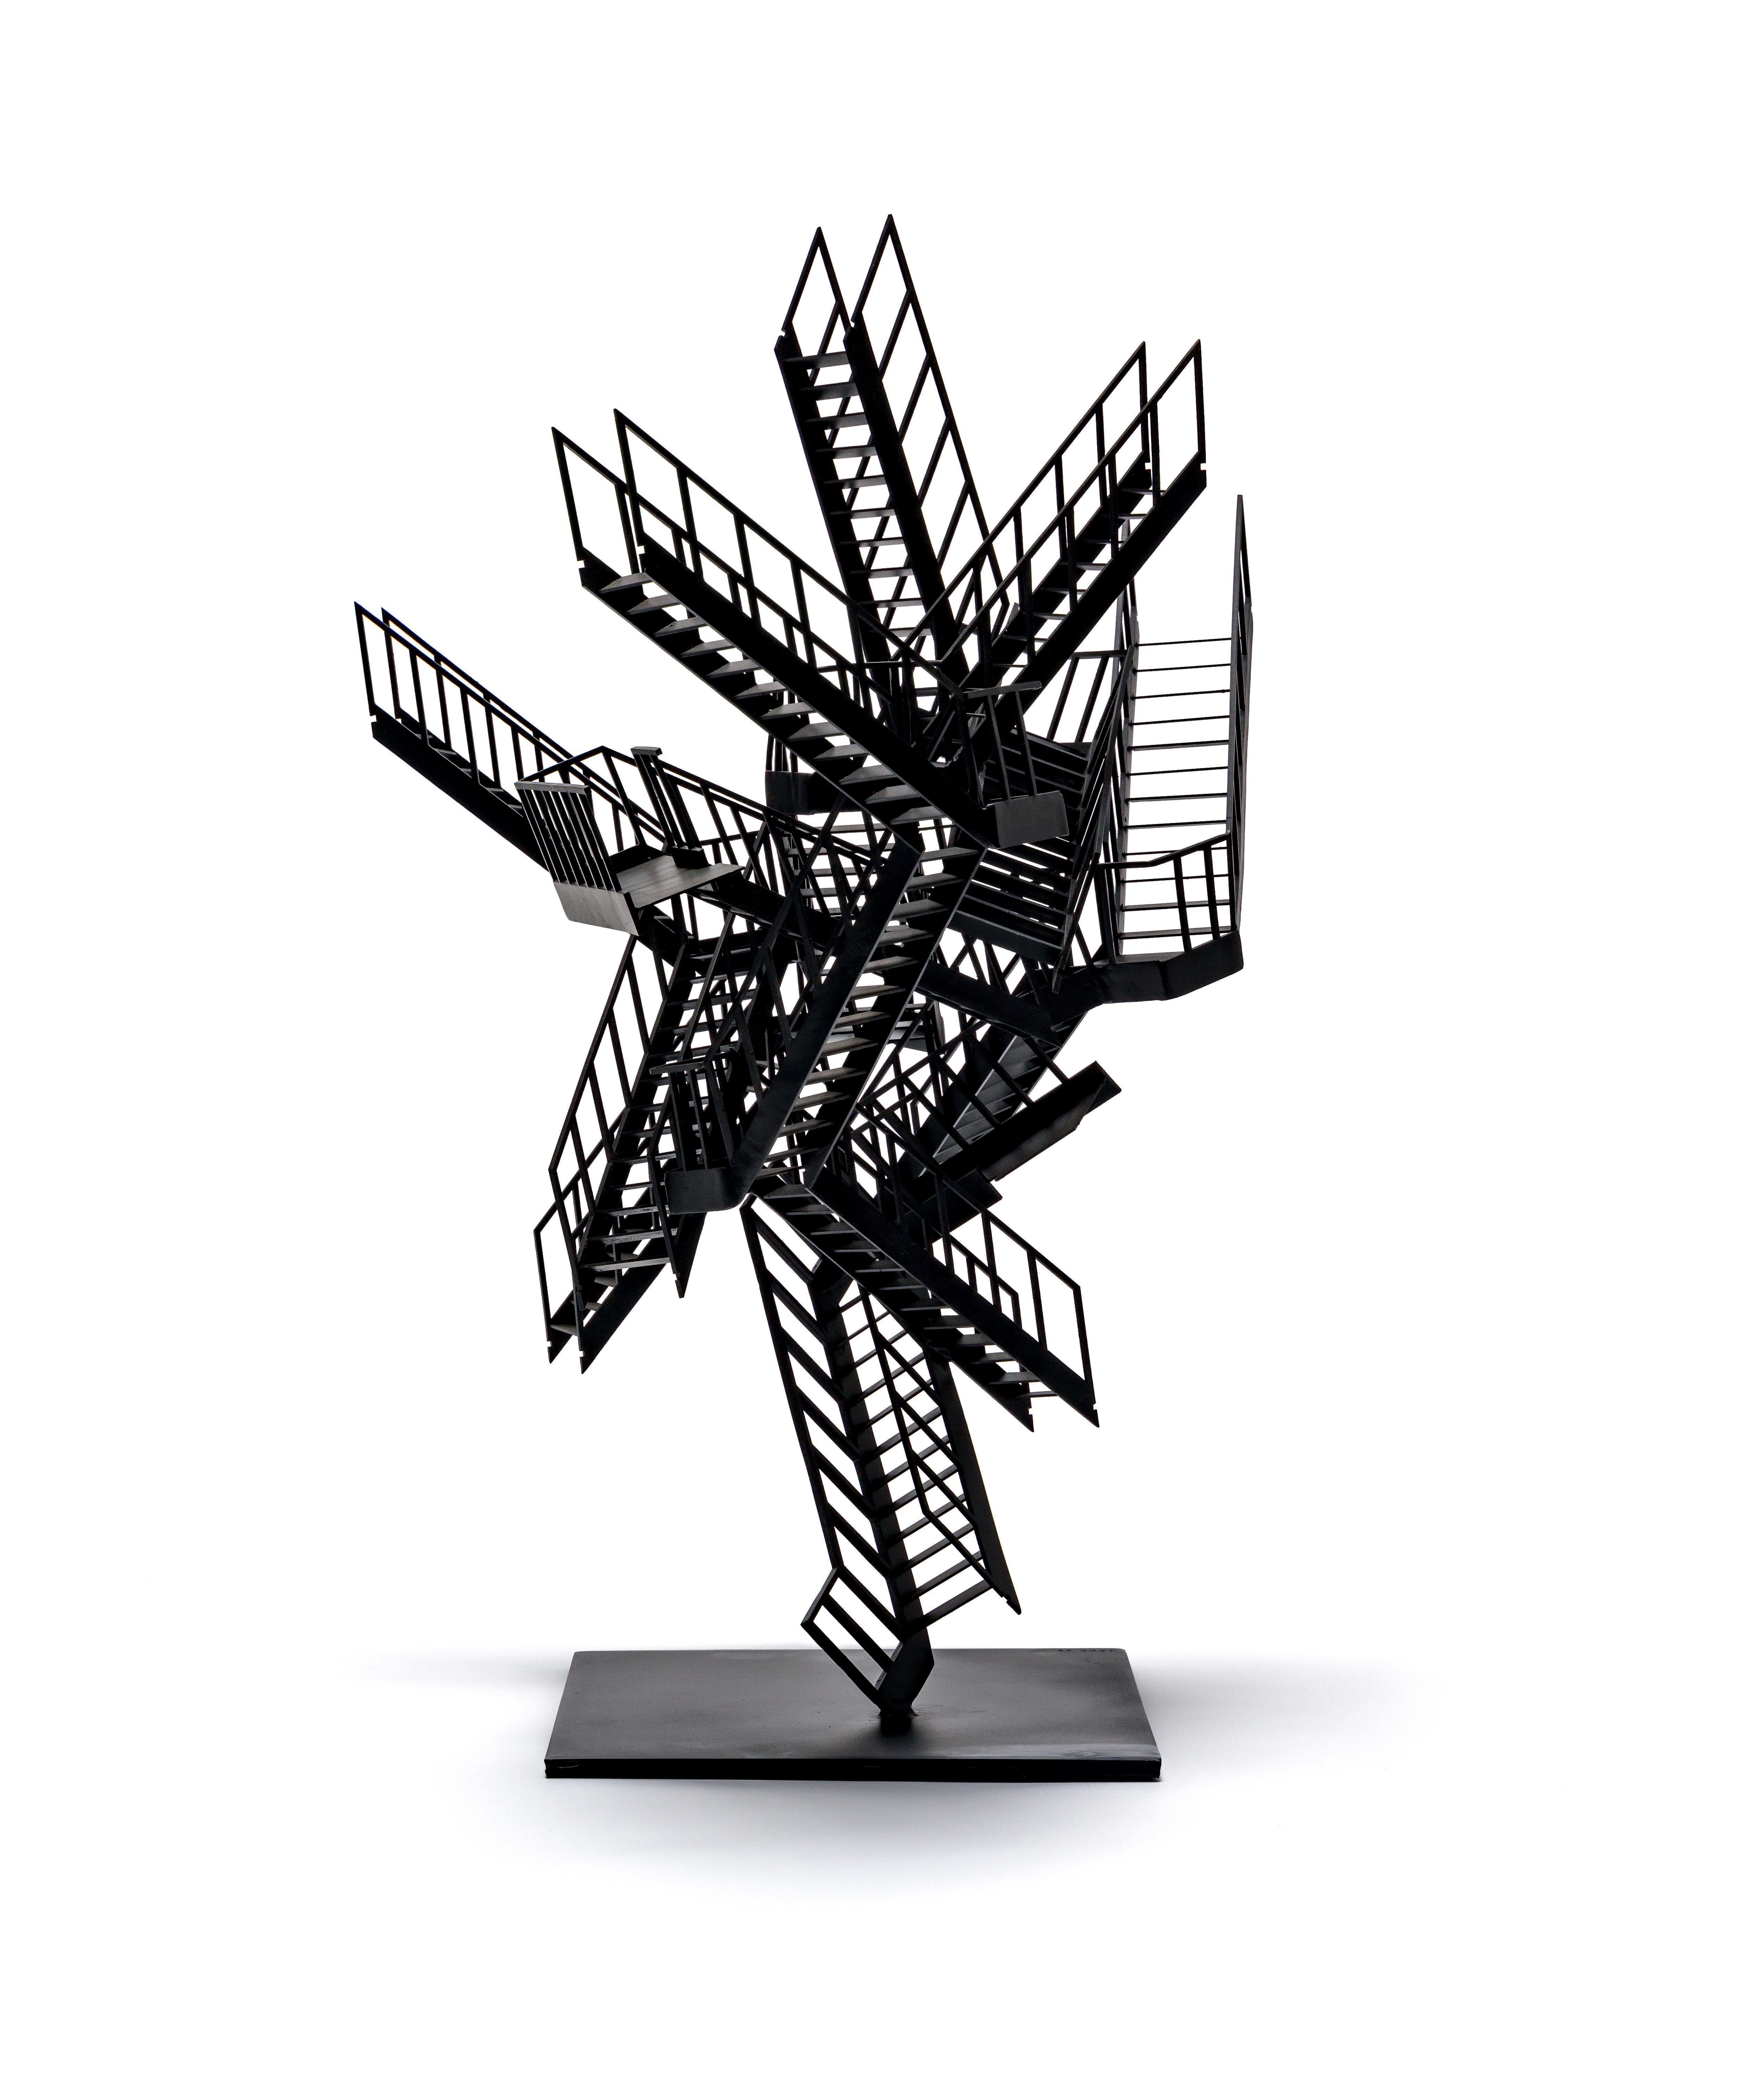 Escalation Incident, Contemporary Staircase sculpture, in black - Sculpture by Jake Michael Singer